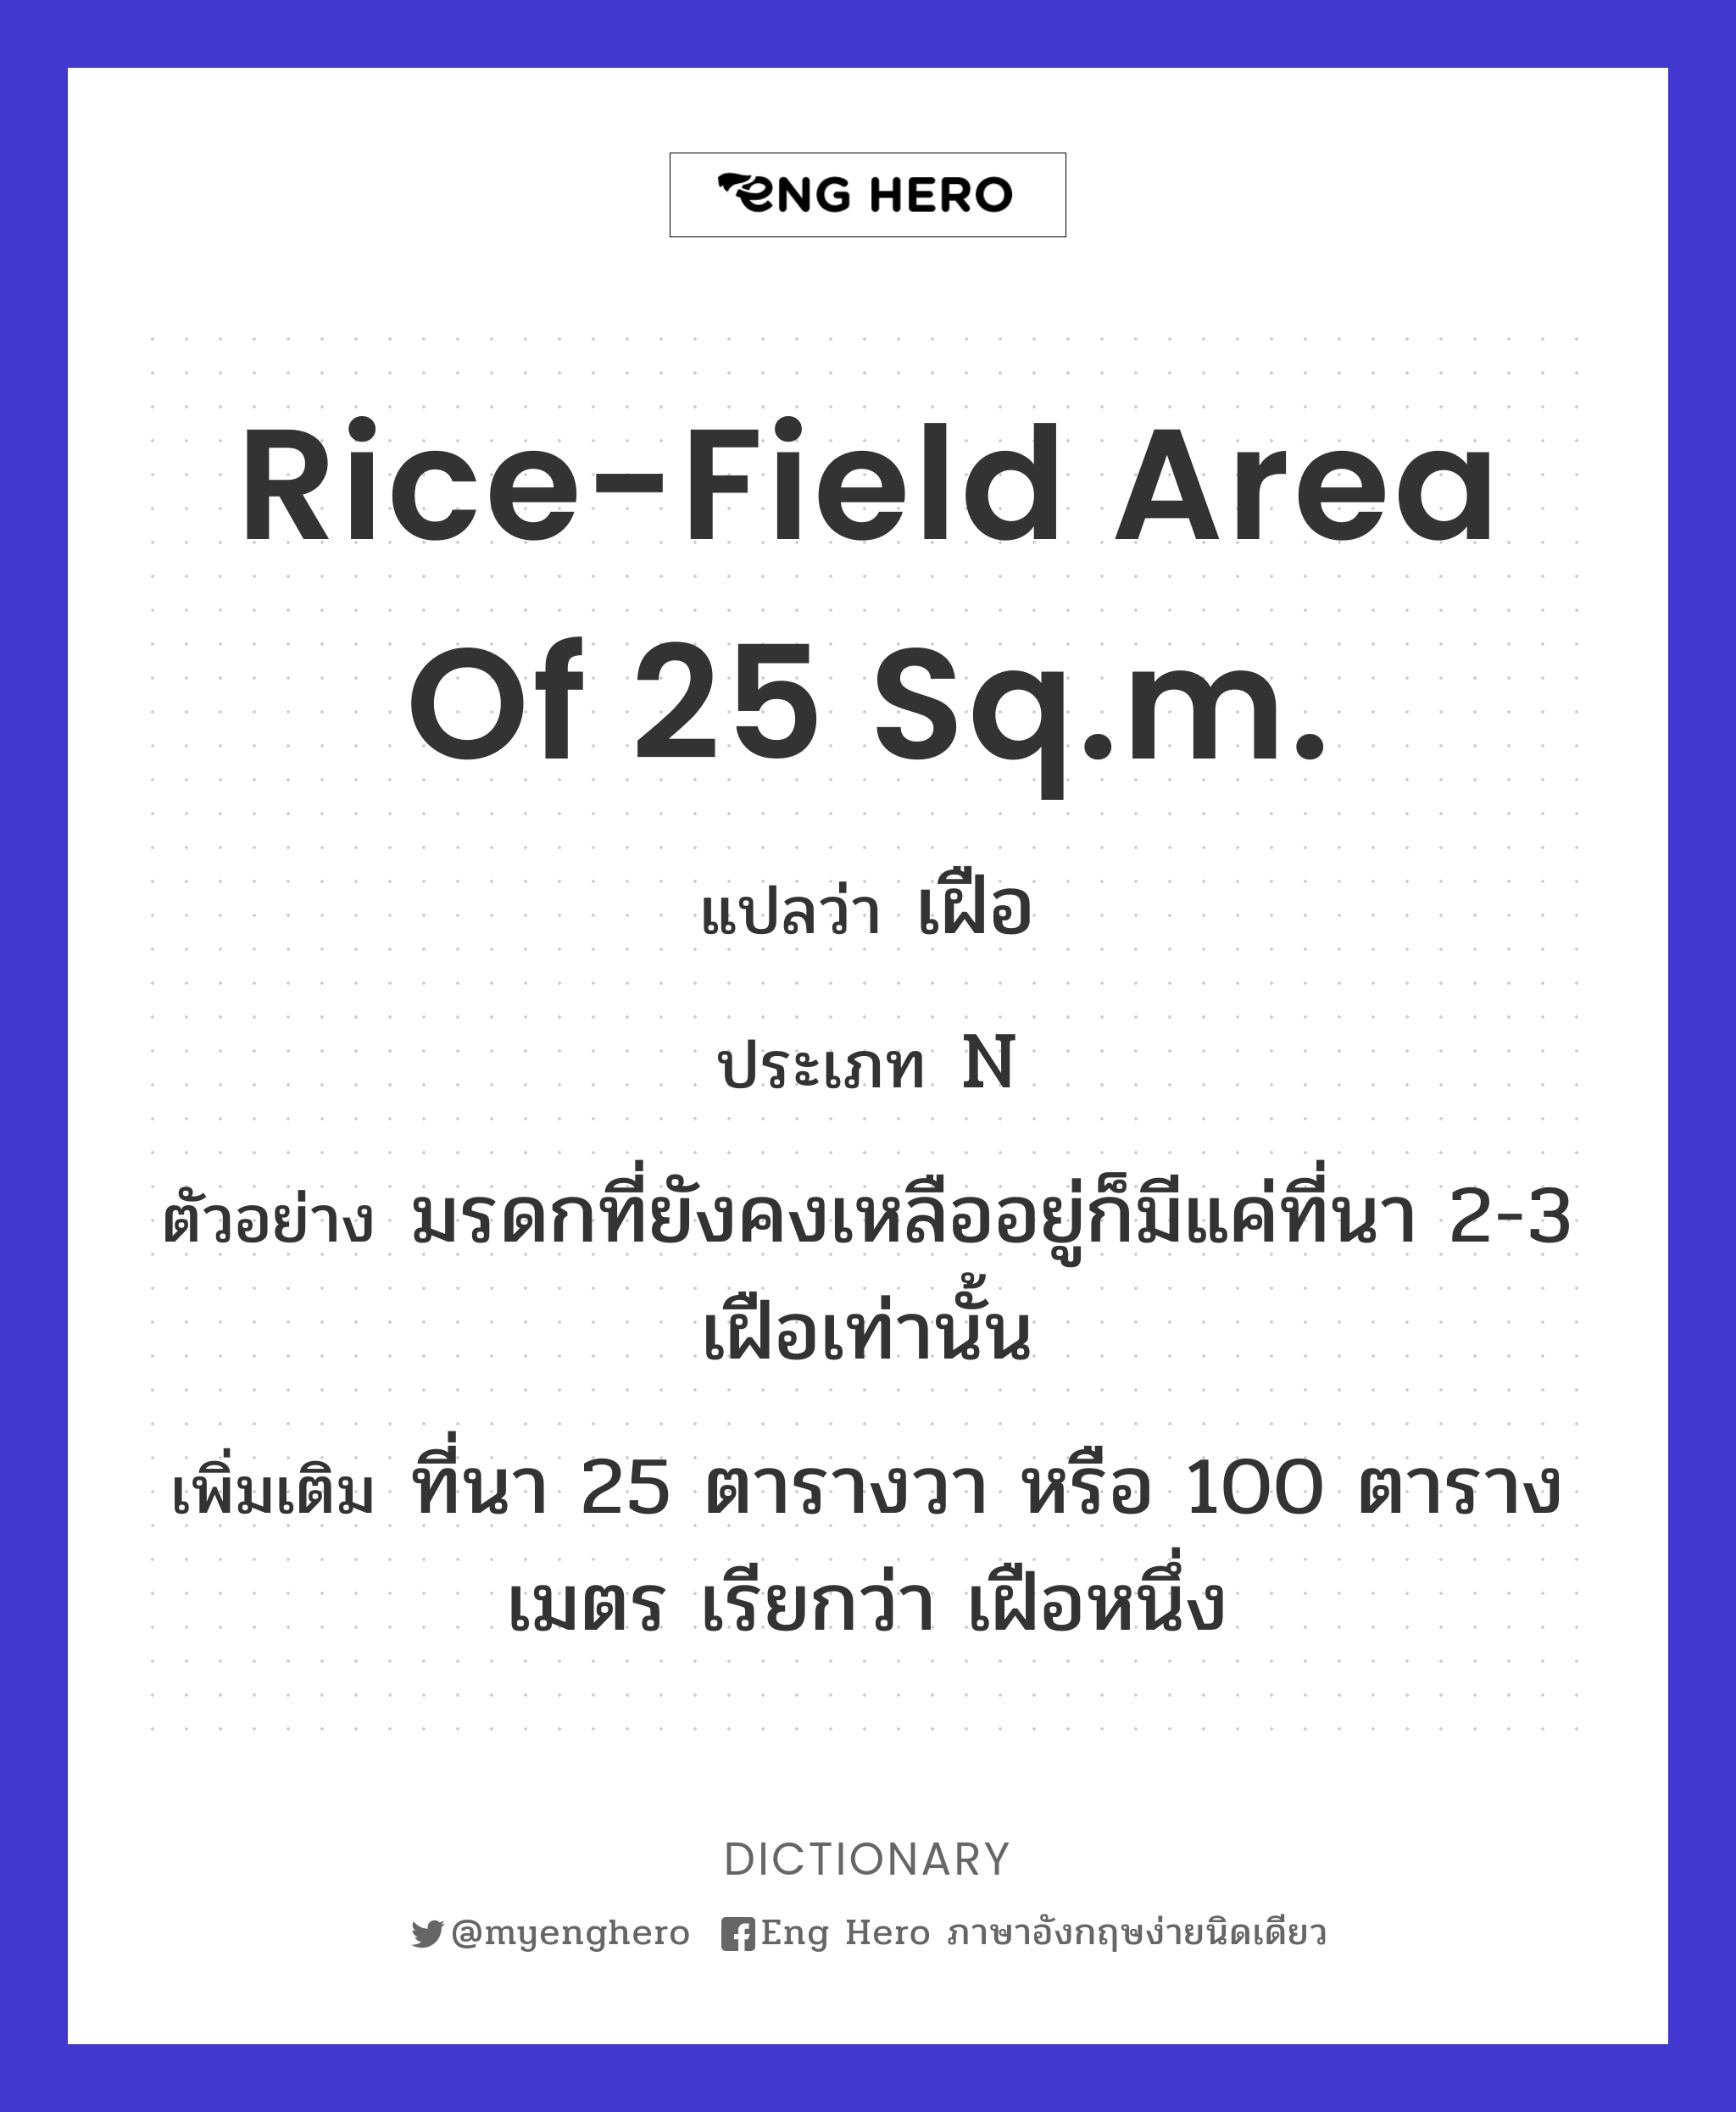 rice-field area of 25 sq.m.